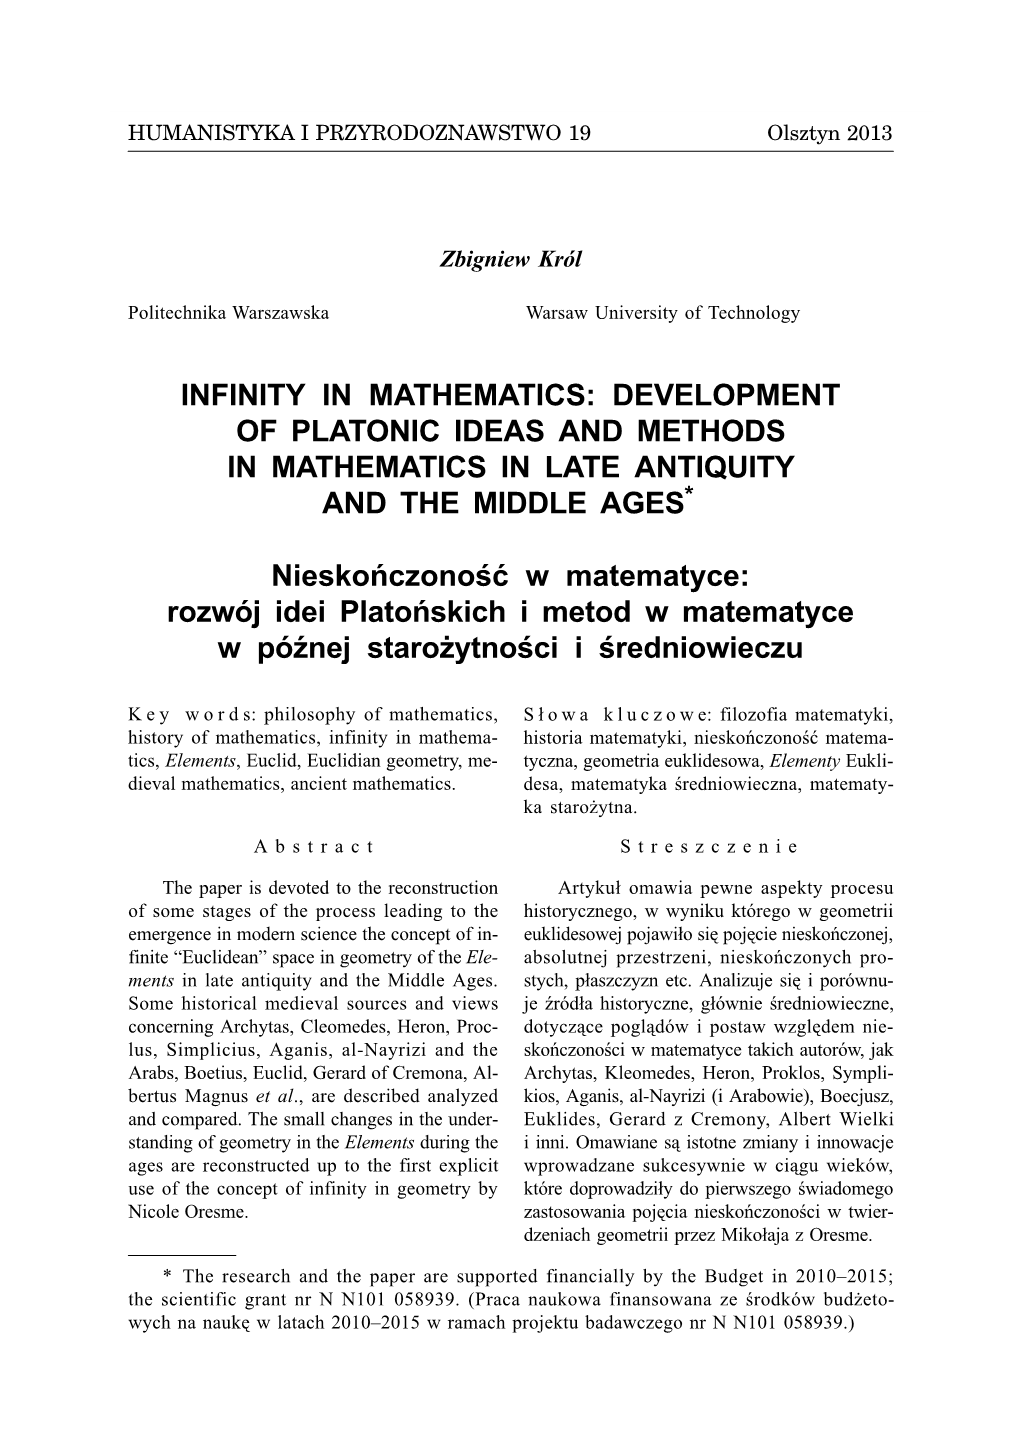 Infinity in Mathematics: Development of Platonic Ideas and Methods in Mathematics in Late Antiquity and the Middle Ages*